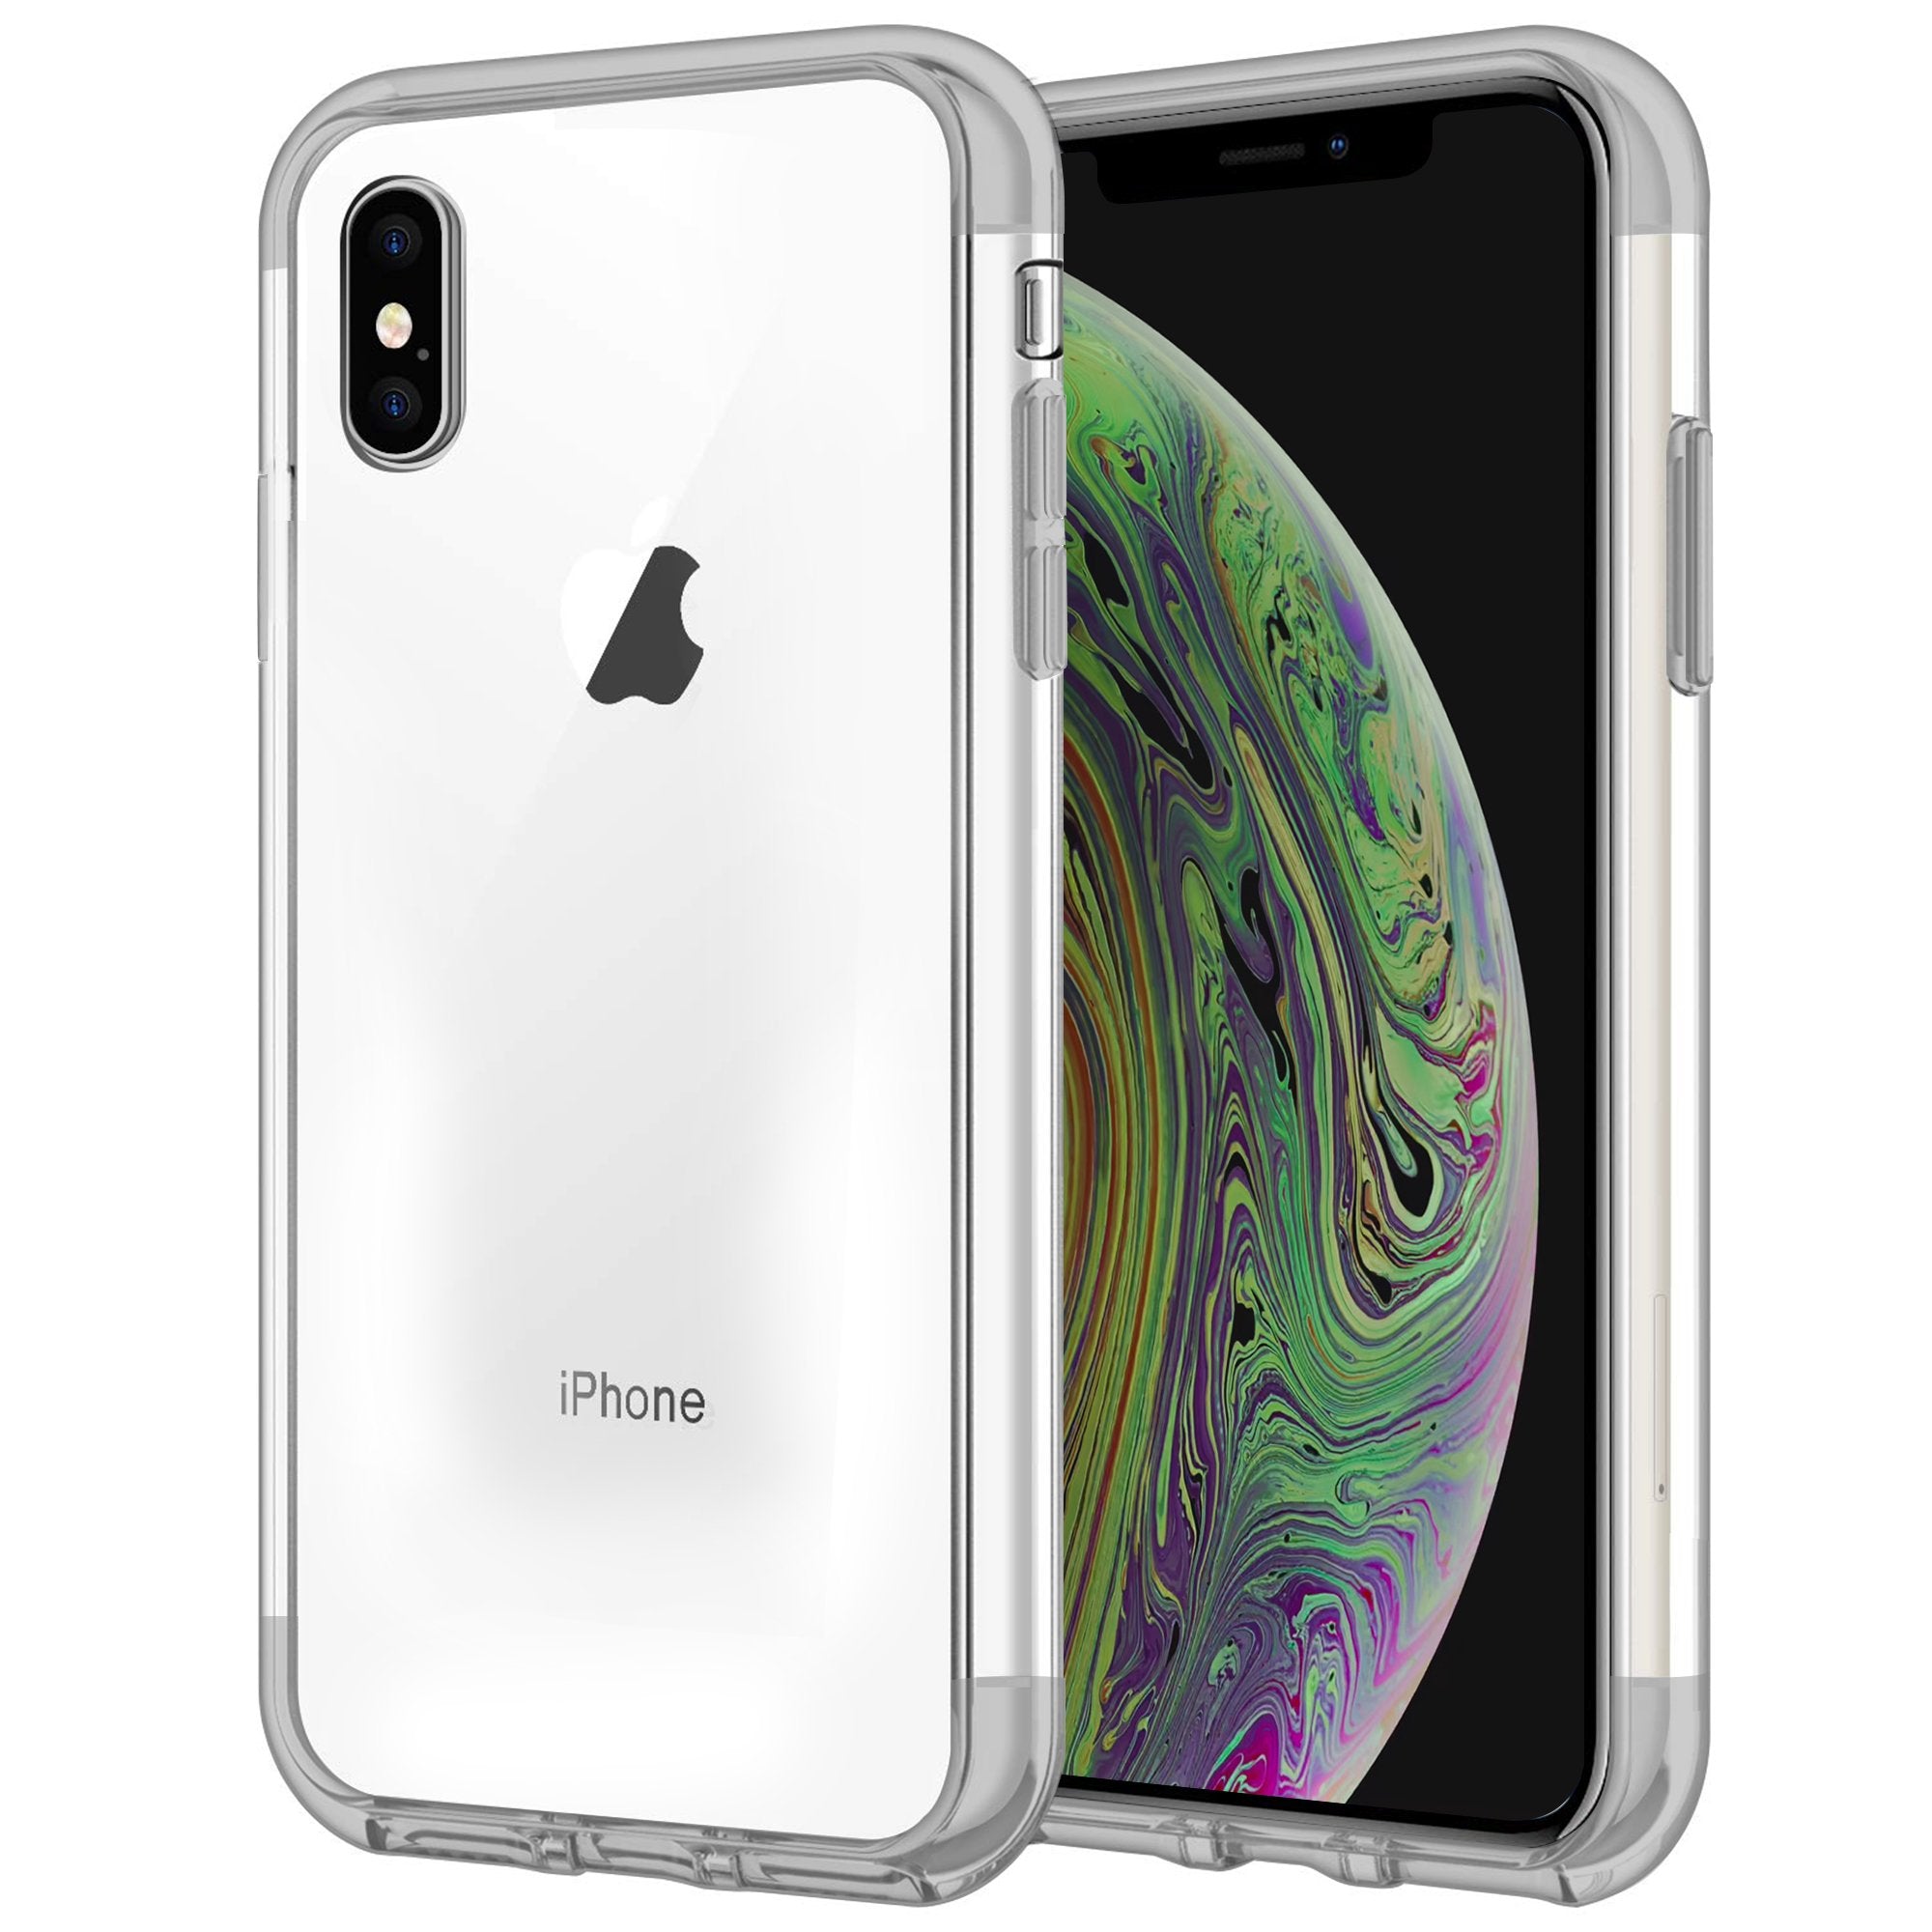 Case for iPhone XS Max Shock Proof Soft TPU Silicone Phone Clear Slim Cover